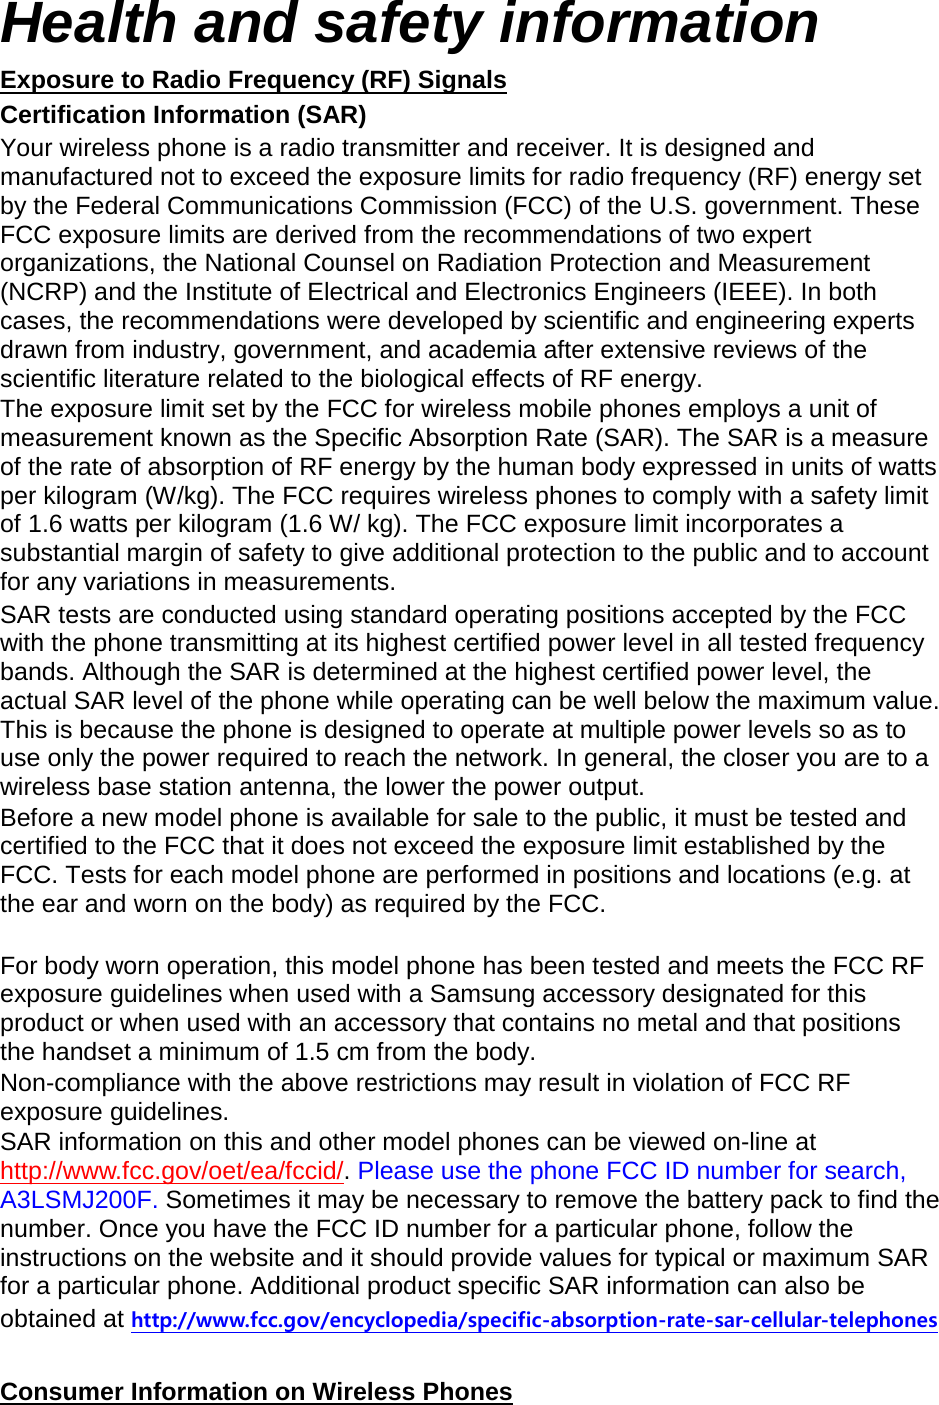 Health and safety information Exposure to Radio Frequency (RF) Signals Certification Information (SAR) Your wireless phone is a radio transmitter and receiver. It is designed and manufactured not to exceed the exposure limits for radio frequency (RF) energy set by the Federal Communications Commission (FCC) of the U.S. government. These FCC exposure limits are derived from the recommendations of two expert organizations, the National Counsel on Radiation Protection and Measurement (NCRP) and the Institute of Electrical and Electronics Engineers (IEEE). In both cases, the recommendations were developed by scientific and engineering experts drawn from industry, government, and academia after extensive reviews of the scientific literature related to the biological effects of RF energy. The exposure limit set by the FCC for wireless mobile phones employs a unit of measurement known as the Specific Absorption Rate (SAR). The SAR is a measure of the rate of absorption of RF energy by the human body expressed in units of watts per kilogram (W/kg). The FCC requires wireless phones to comply with a safety limit of 1.6 watts per kilogram (1.6 W/ kg). The FCC exposure limit incorporates a substantial margin of safety to give additional protection to the public and to account for any variations in measurements. SAR tests are conducted using standard operating positions accepted by the FCC with the phone transmitting at its highest certified power level in all tested frequency bands. Although the SAR is determined at the highest certified power level, the actual SAR level of the phone while operating can be well below the maximum value. This is because the phone is designed to operate at multiple power levels so as to use only the power required to reach the network. In general, the closer you are to a wireless base station antenna, the lower the power output. Before a new model phone is available for sale to the public, it must be tested and certified to the FCC that it does not exceed the exposure limit established by the FCC. Tests for each model phone are performed in positions and locations (e.g. at the ear and worn on the body) as required by the FCC.      For body worn operation, this model phone has been tested and meets the FCC RF exposure guidelines when used with a Samsung accessory designated for this product or when used with an accessory that contains no metal and that positions the handset a minimum of 1.5 cm from the body.   Non-compliance with the above restrictions may result in violation of FCC RF exposure guidelines. SAR information on this and other model phones can be viewed on-line at http://www.fcc.gov/oet/ea/fccid/. Please use the phone FCC ID number for search, A3LSMJ200F. Sometimes it may be necessary to remove the battery pack to find the number. Once you have the FCC ID number for a particular phone, follow the instructions on the website and it should provide values for typical or maximum SAR for a particular phone. Additional product specific SAR information can also be obtained at http://www.fcc.gov/encyclopedia/specific-absorption-rate-sar-cellular-telephones  Consumer Information on Wireless Phones 